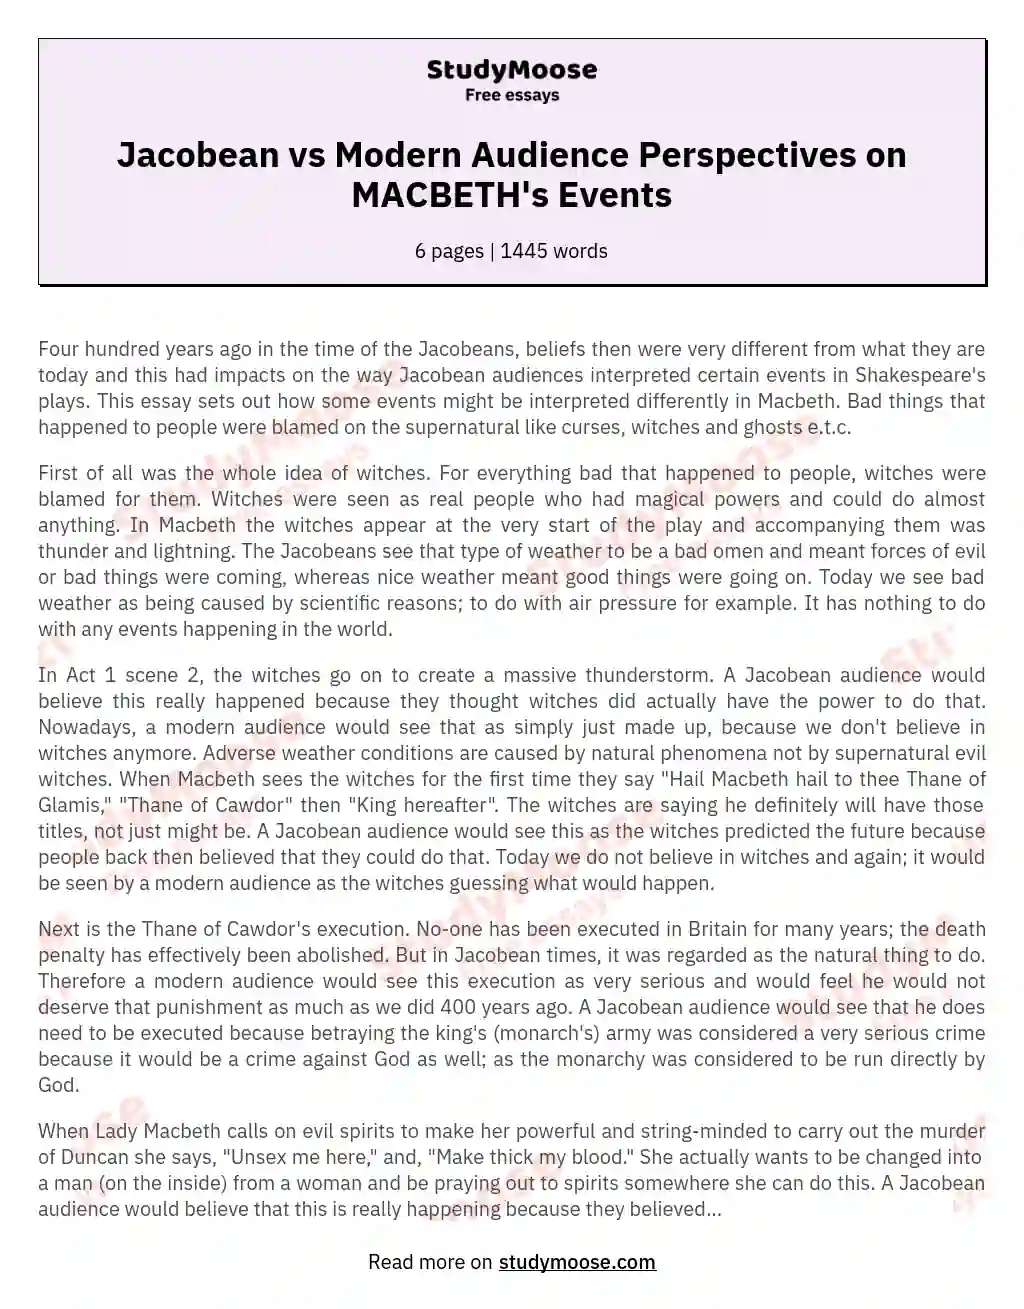 Jacobean vs Modern Audience Perspectives on MACBETH's Events essay